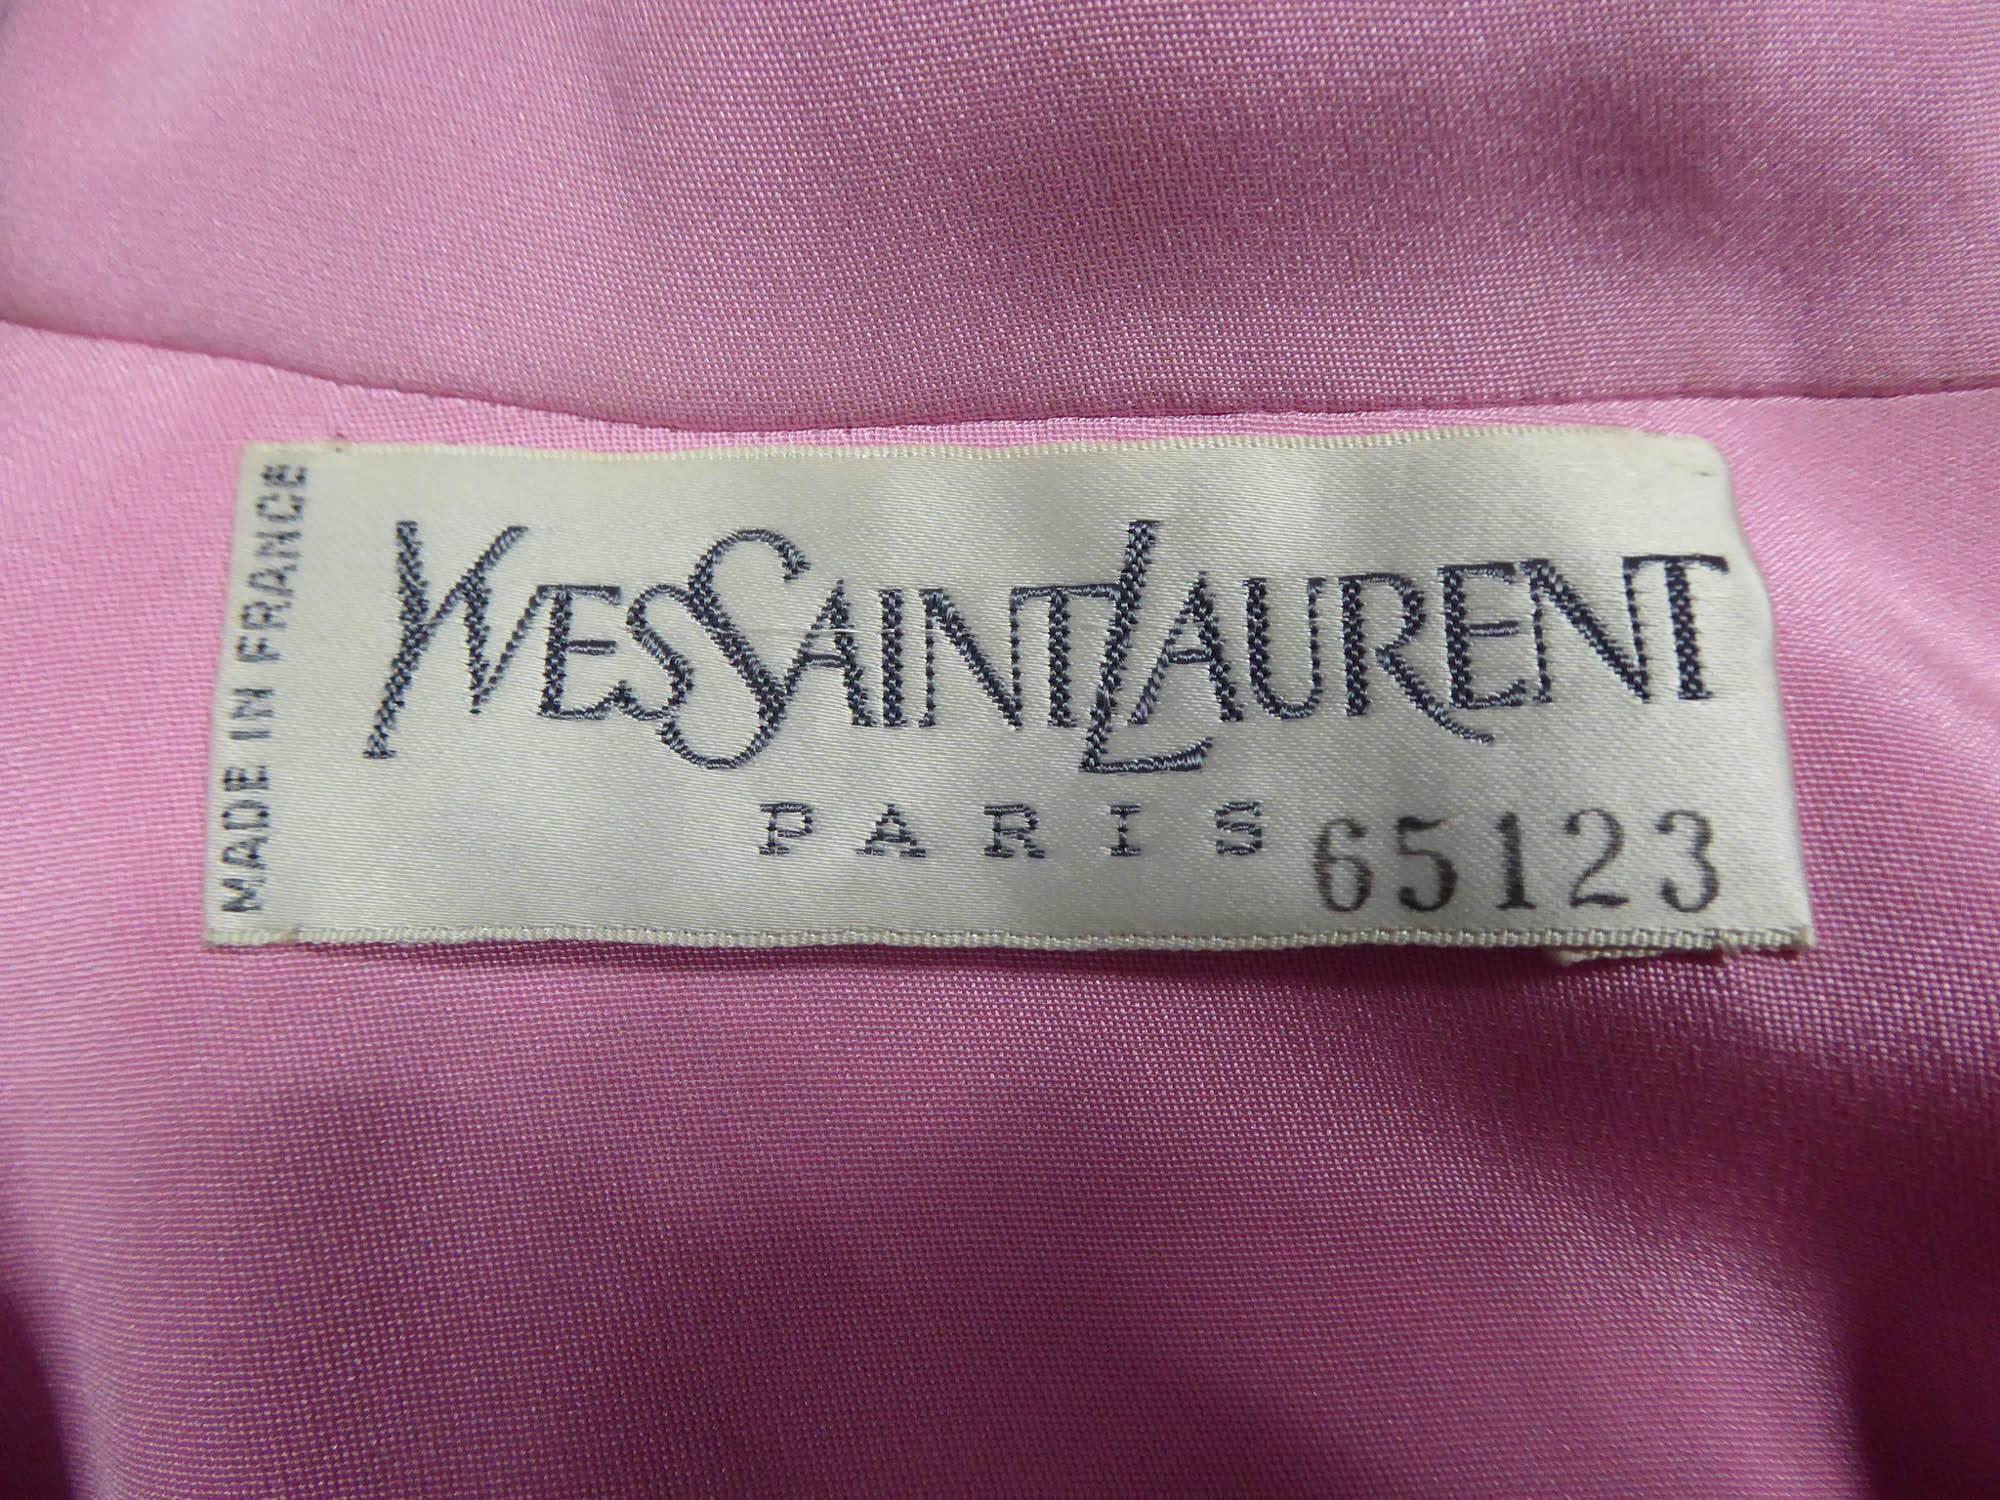 An Yves Saint Laurent Couture Evening Set Numbered 65123, Circa 1989 6